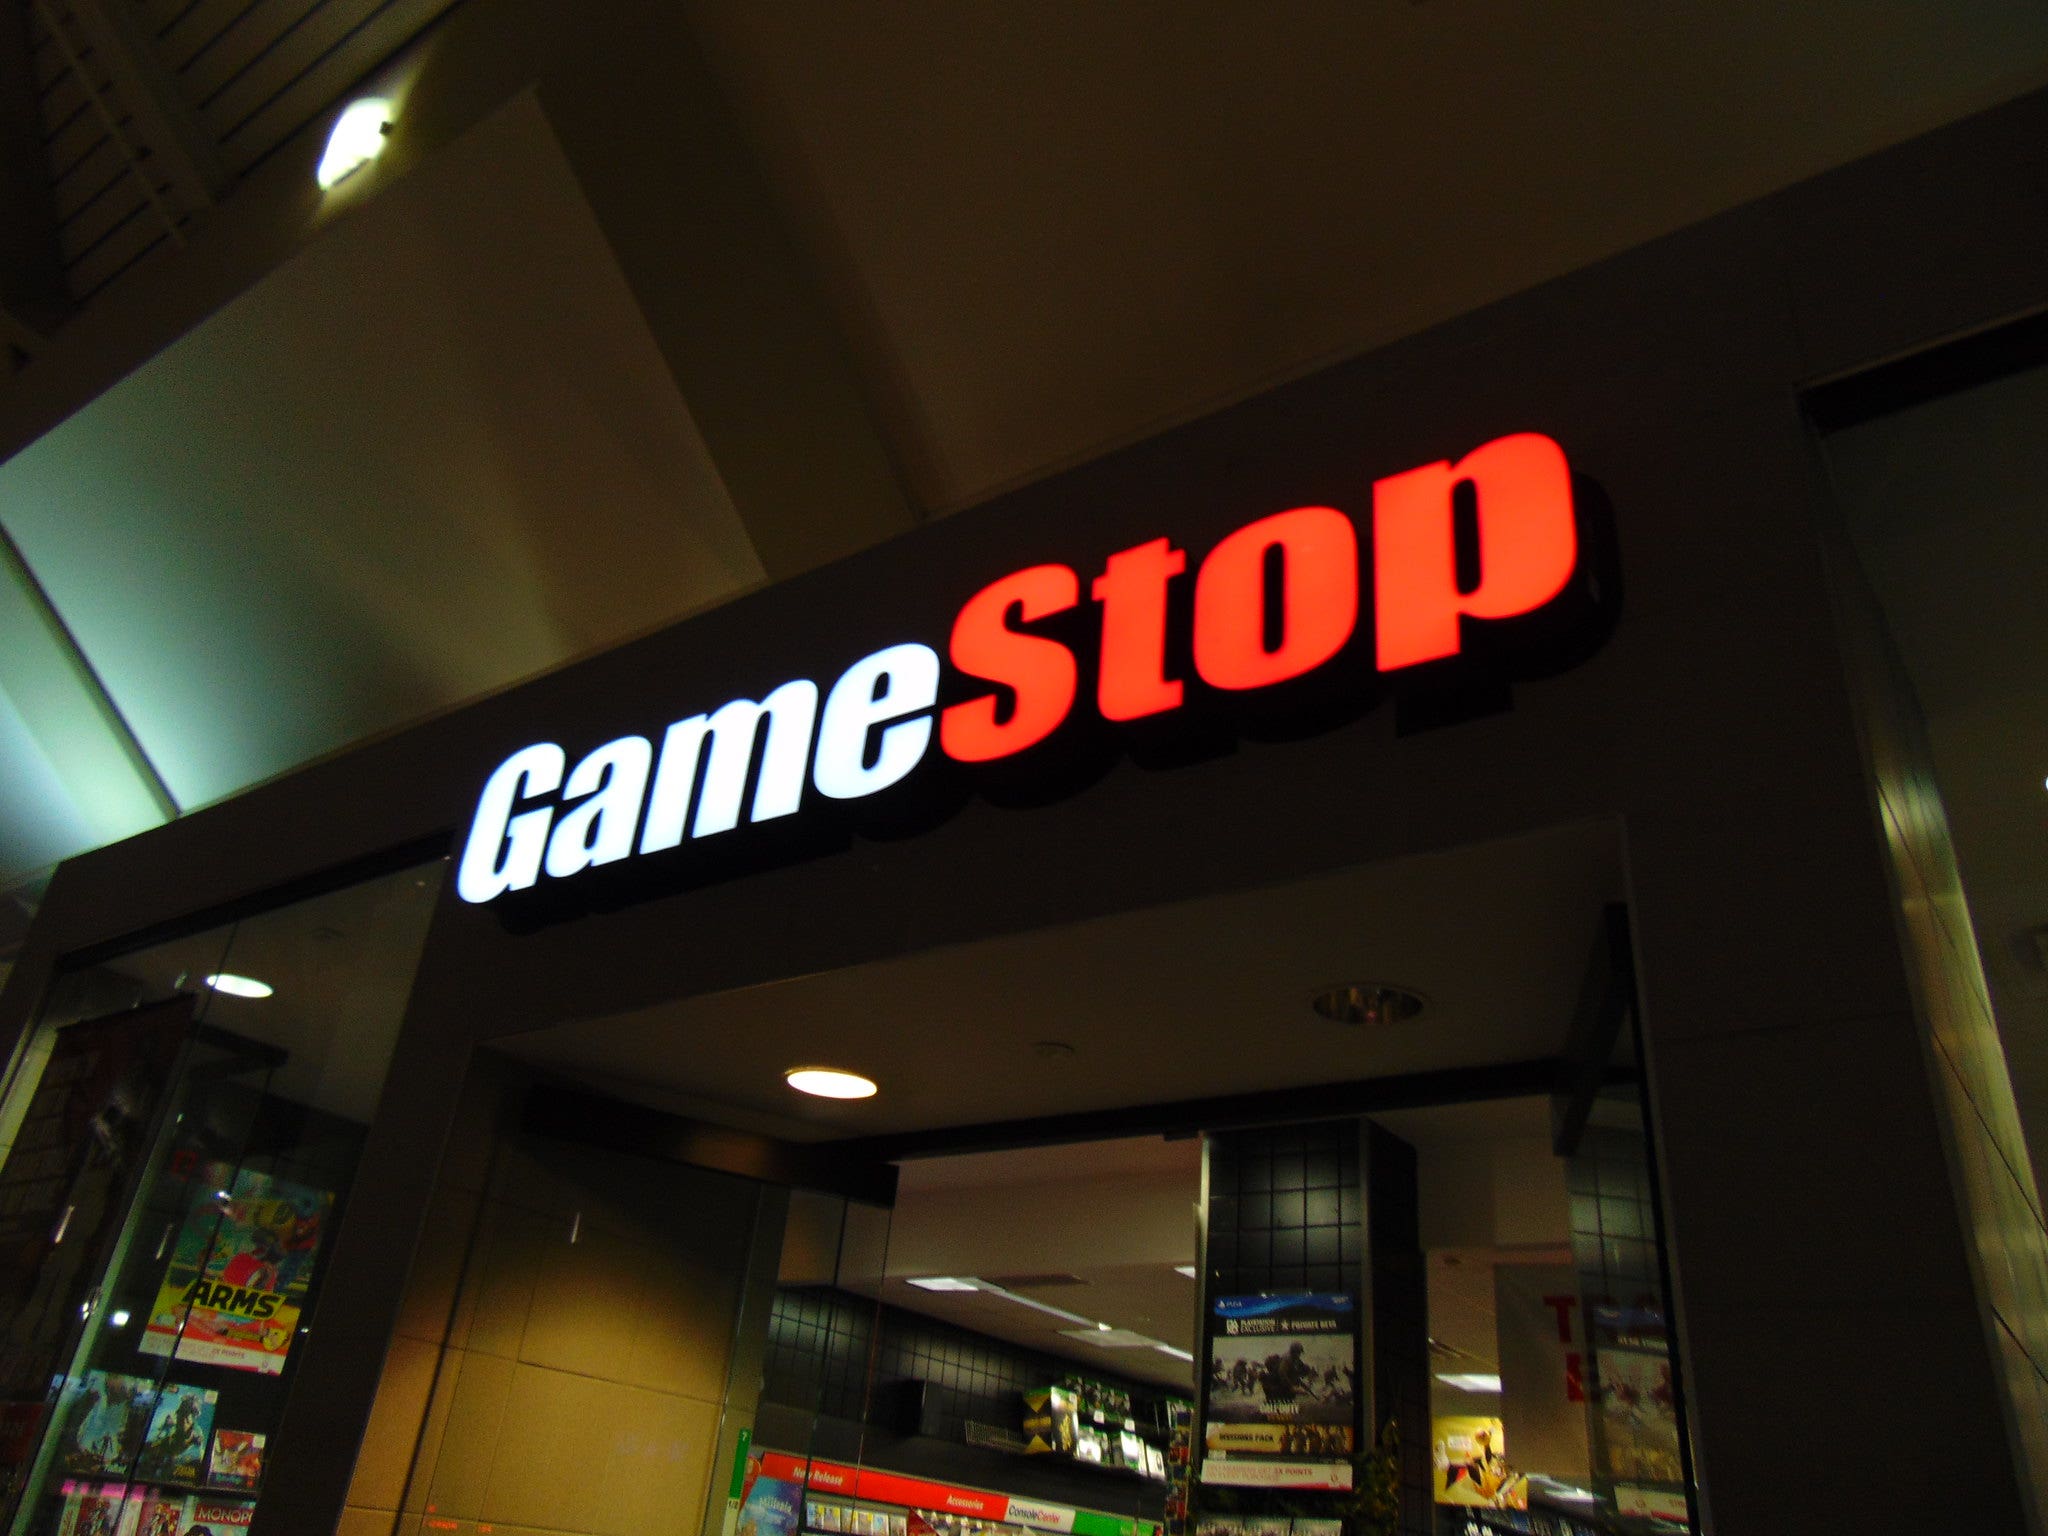 What's Going On With GameStop Stock?